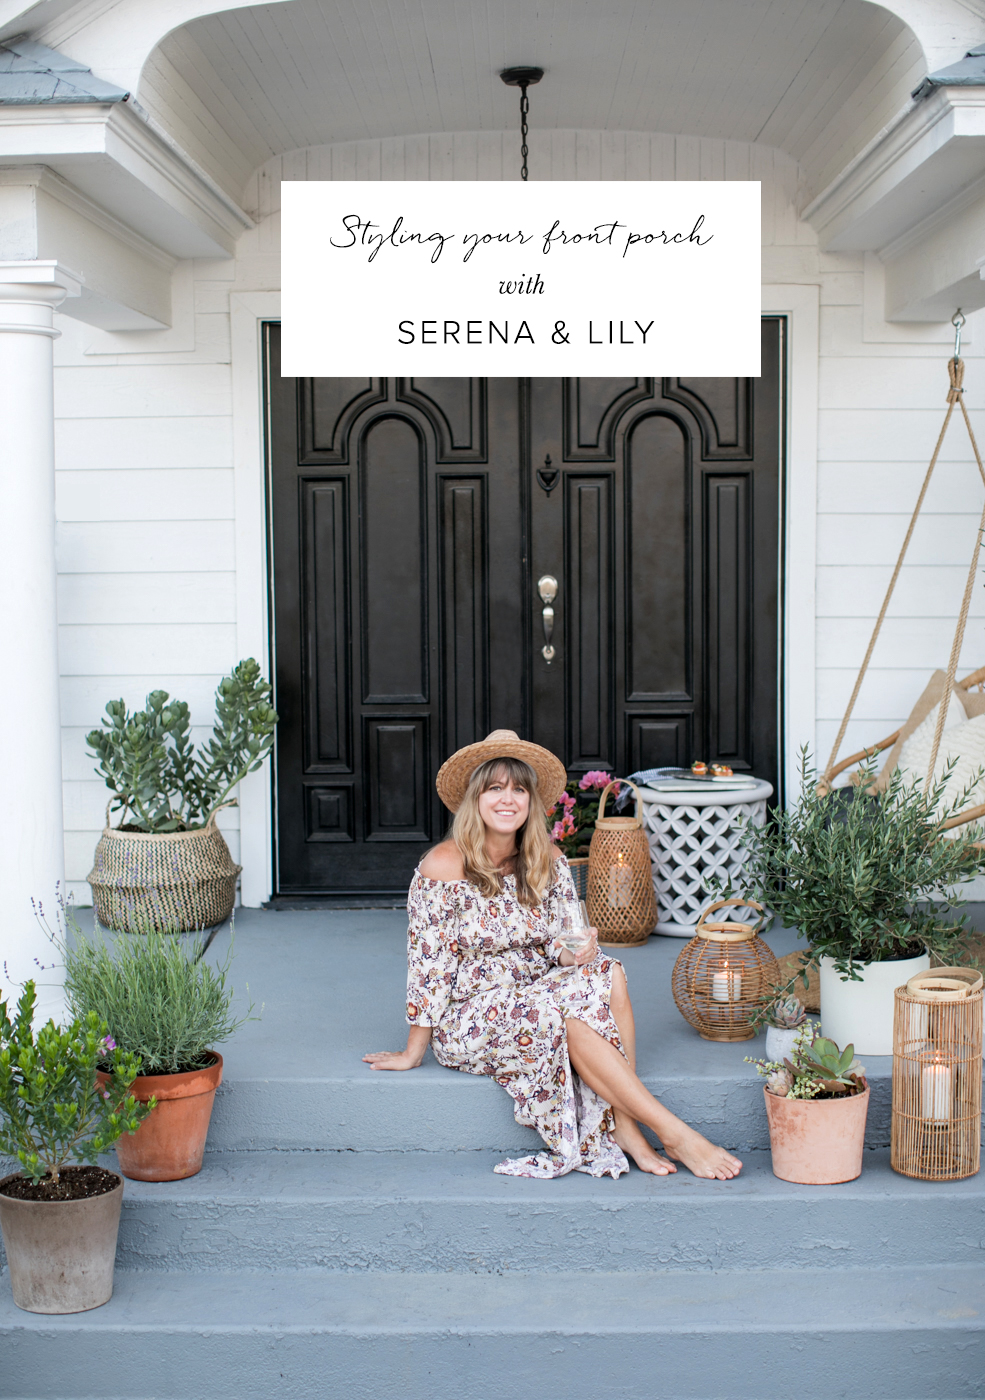 How to style your front porch for entertaining